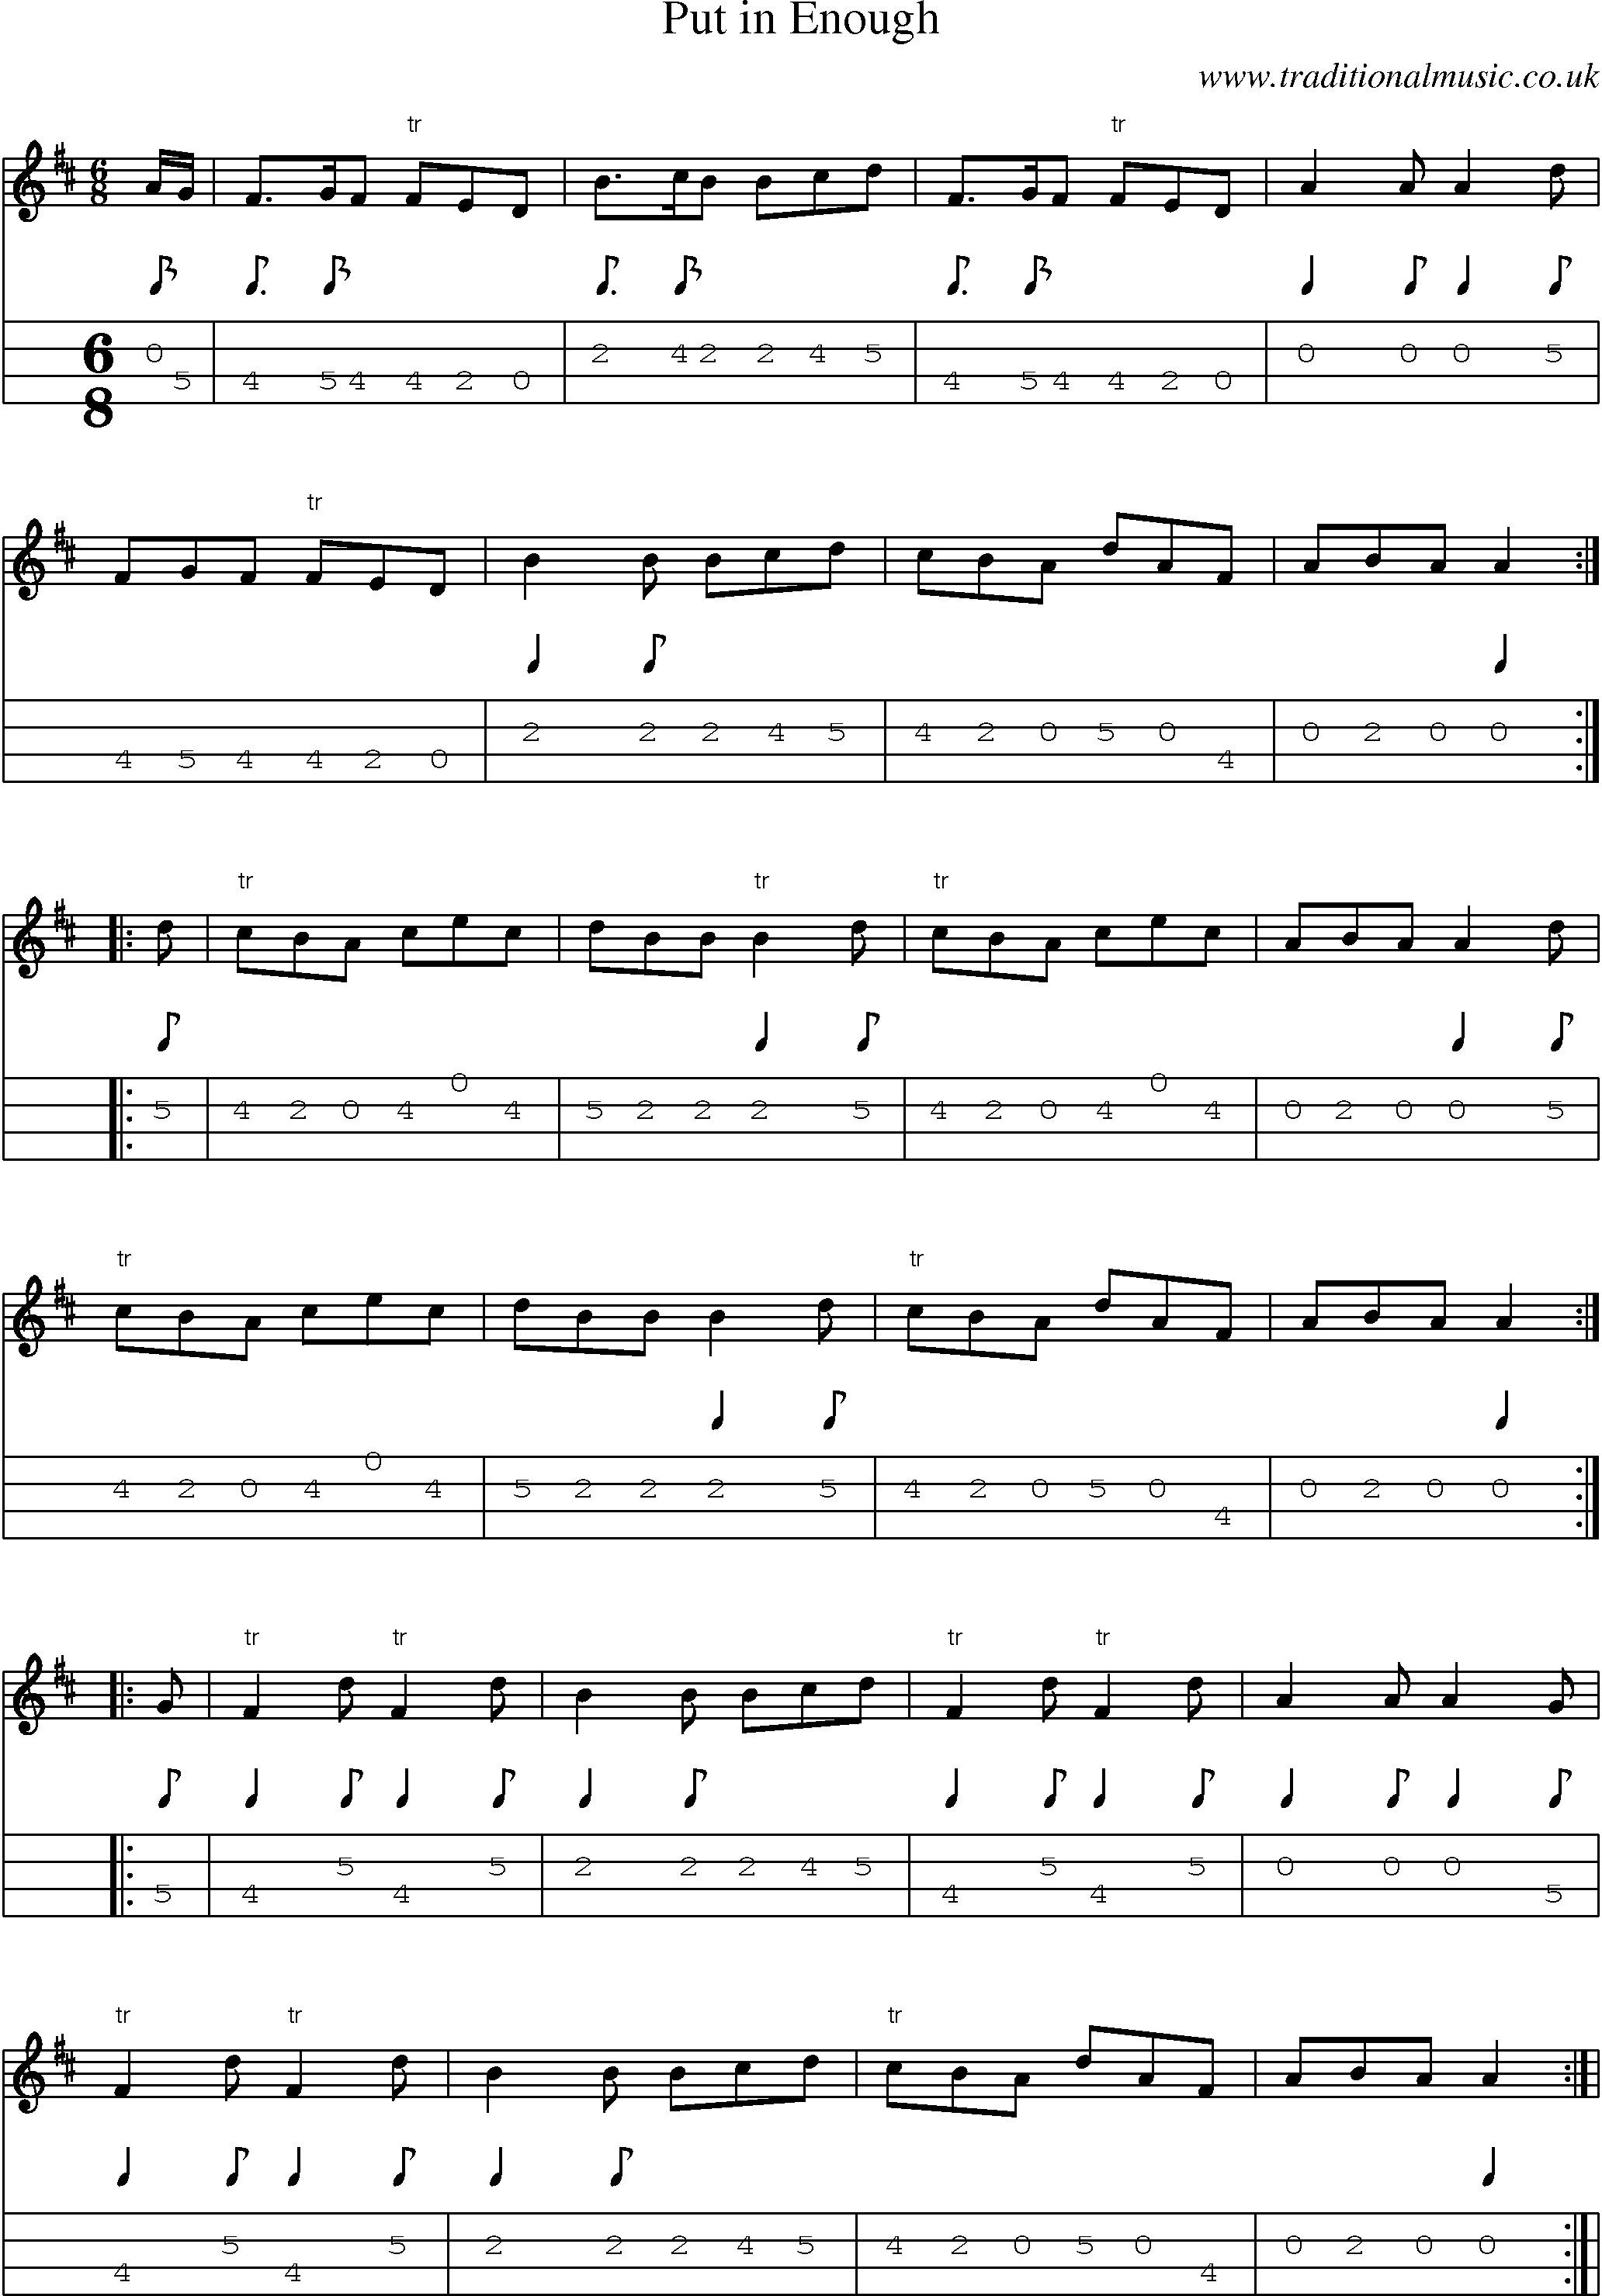 Music Score and Mandolin Tabs for Put In Enough